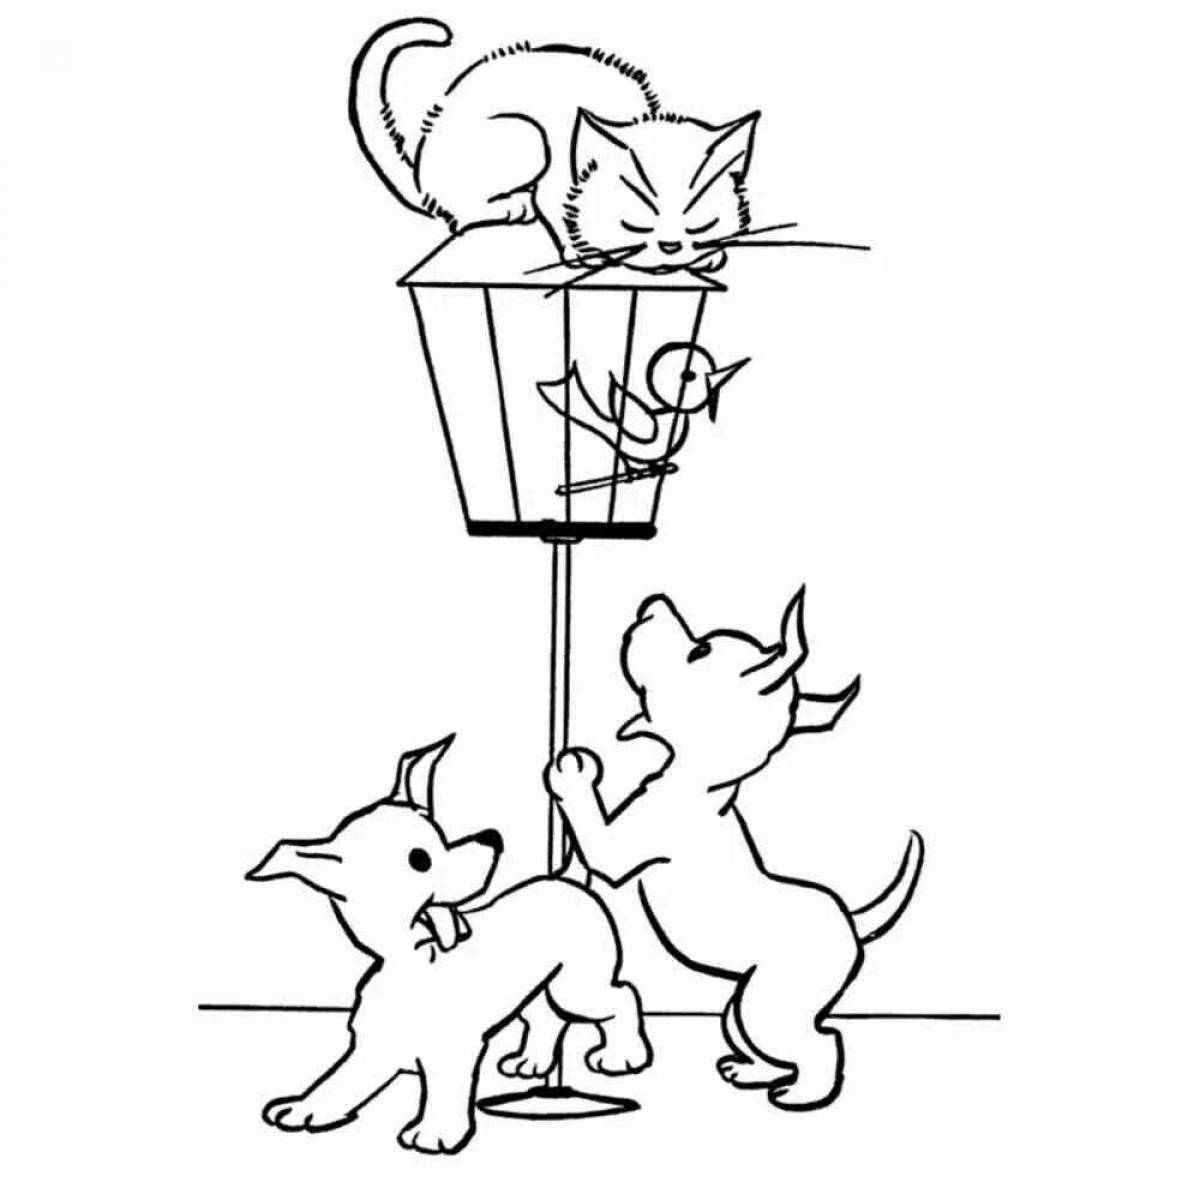 Coloring cat and puppy frolicking